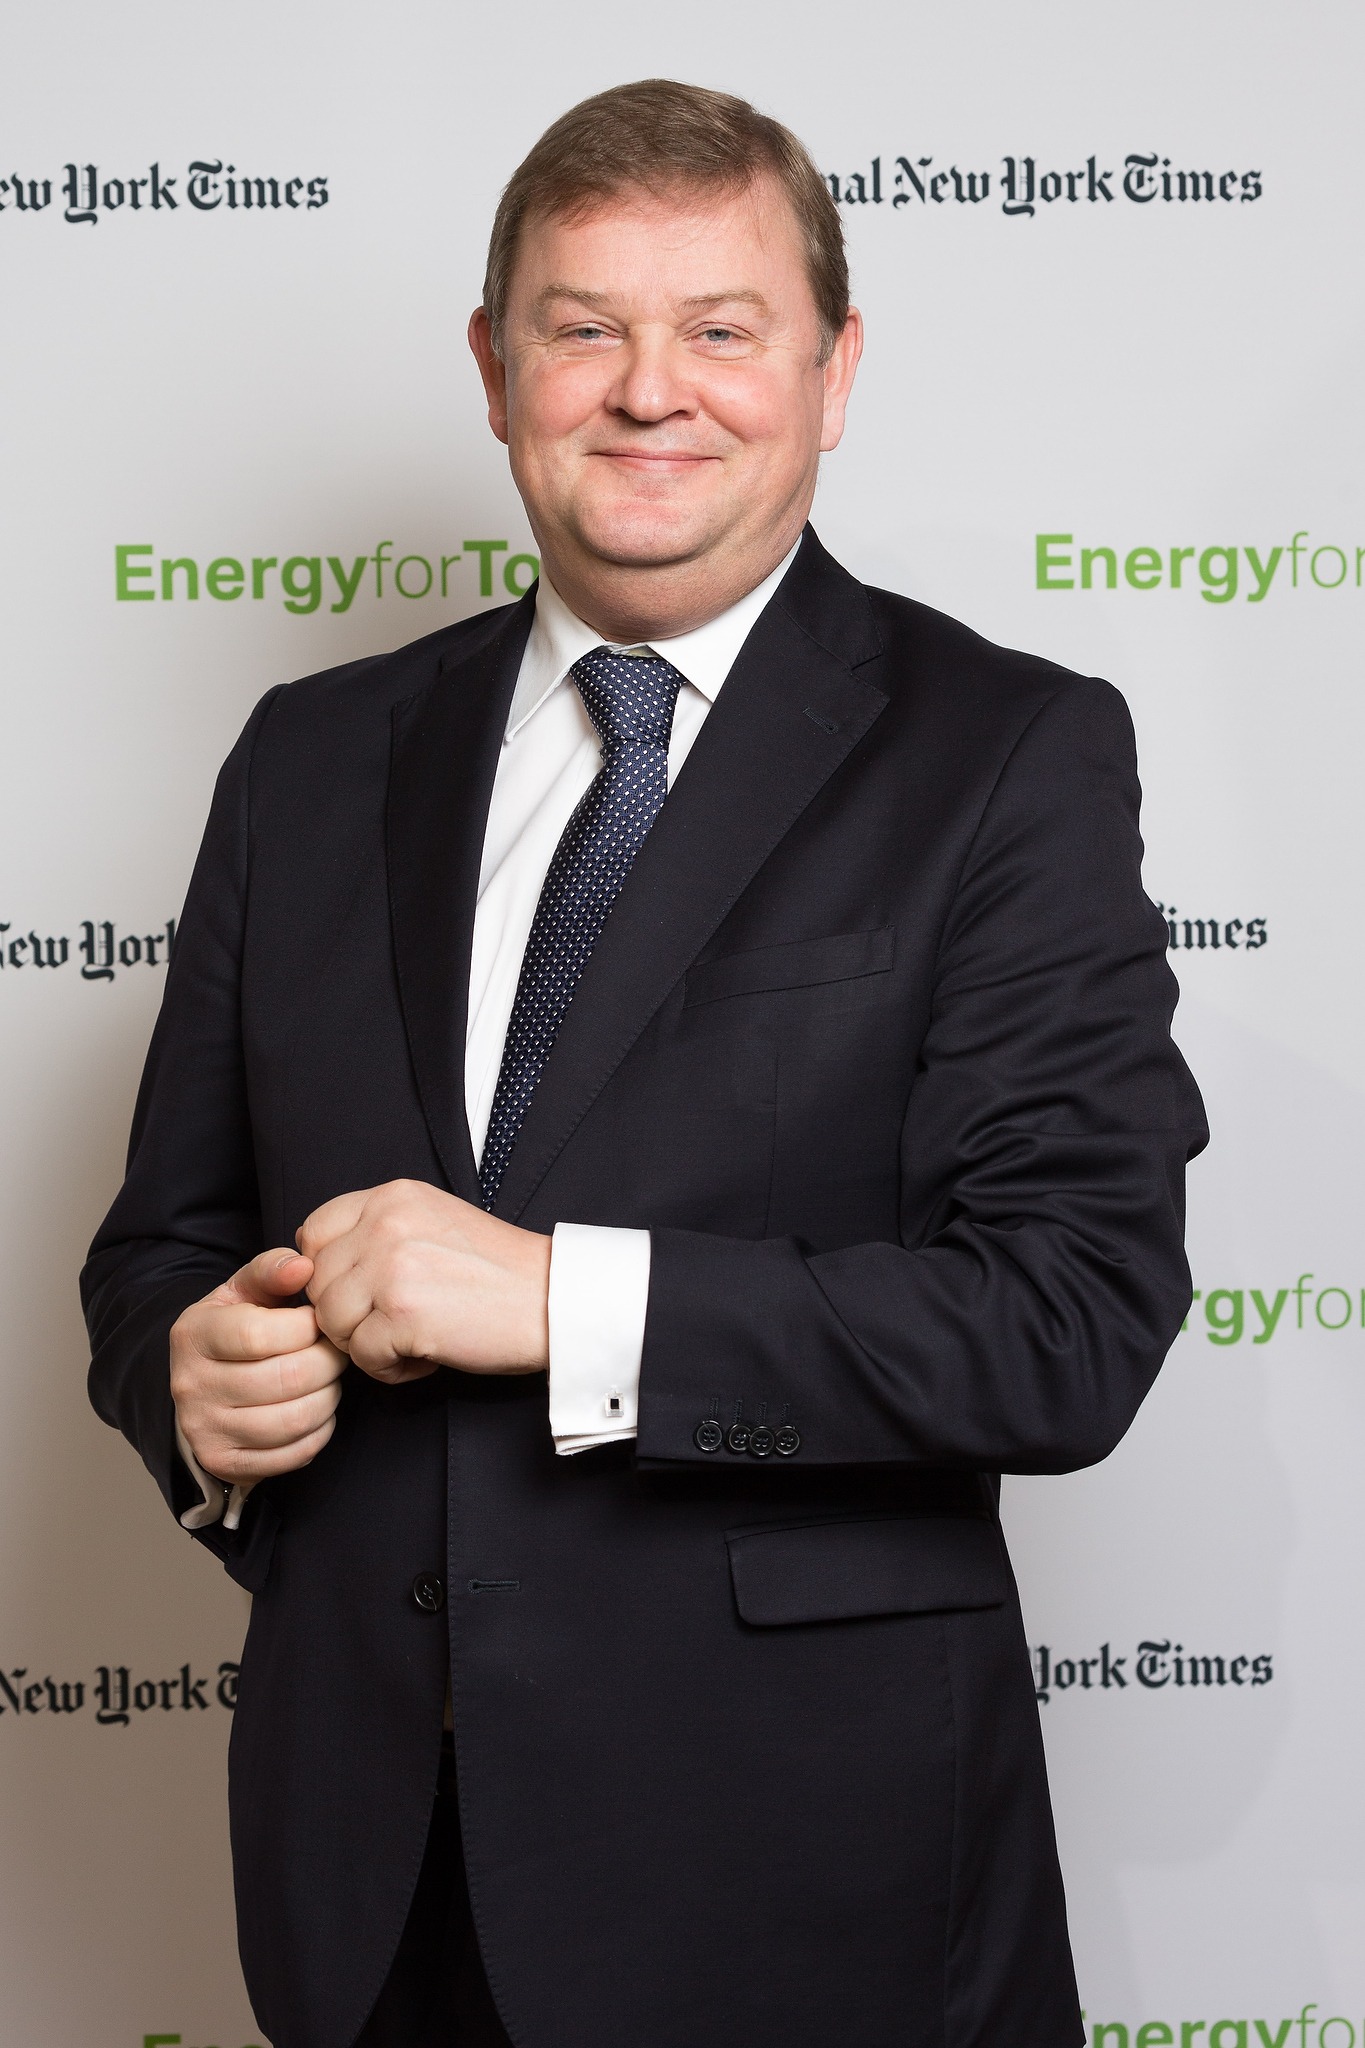 Feike Sjibesma, CEO and Chairman of the managing board